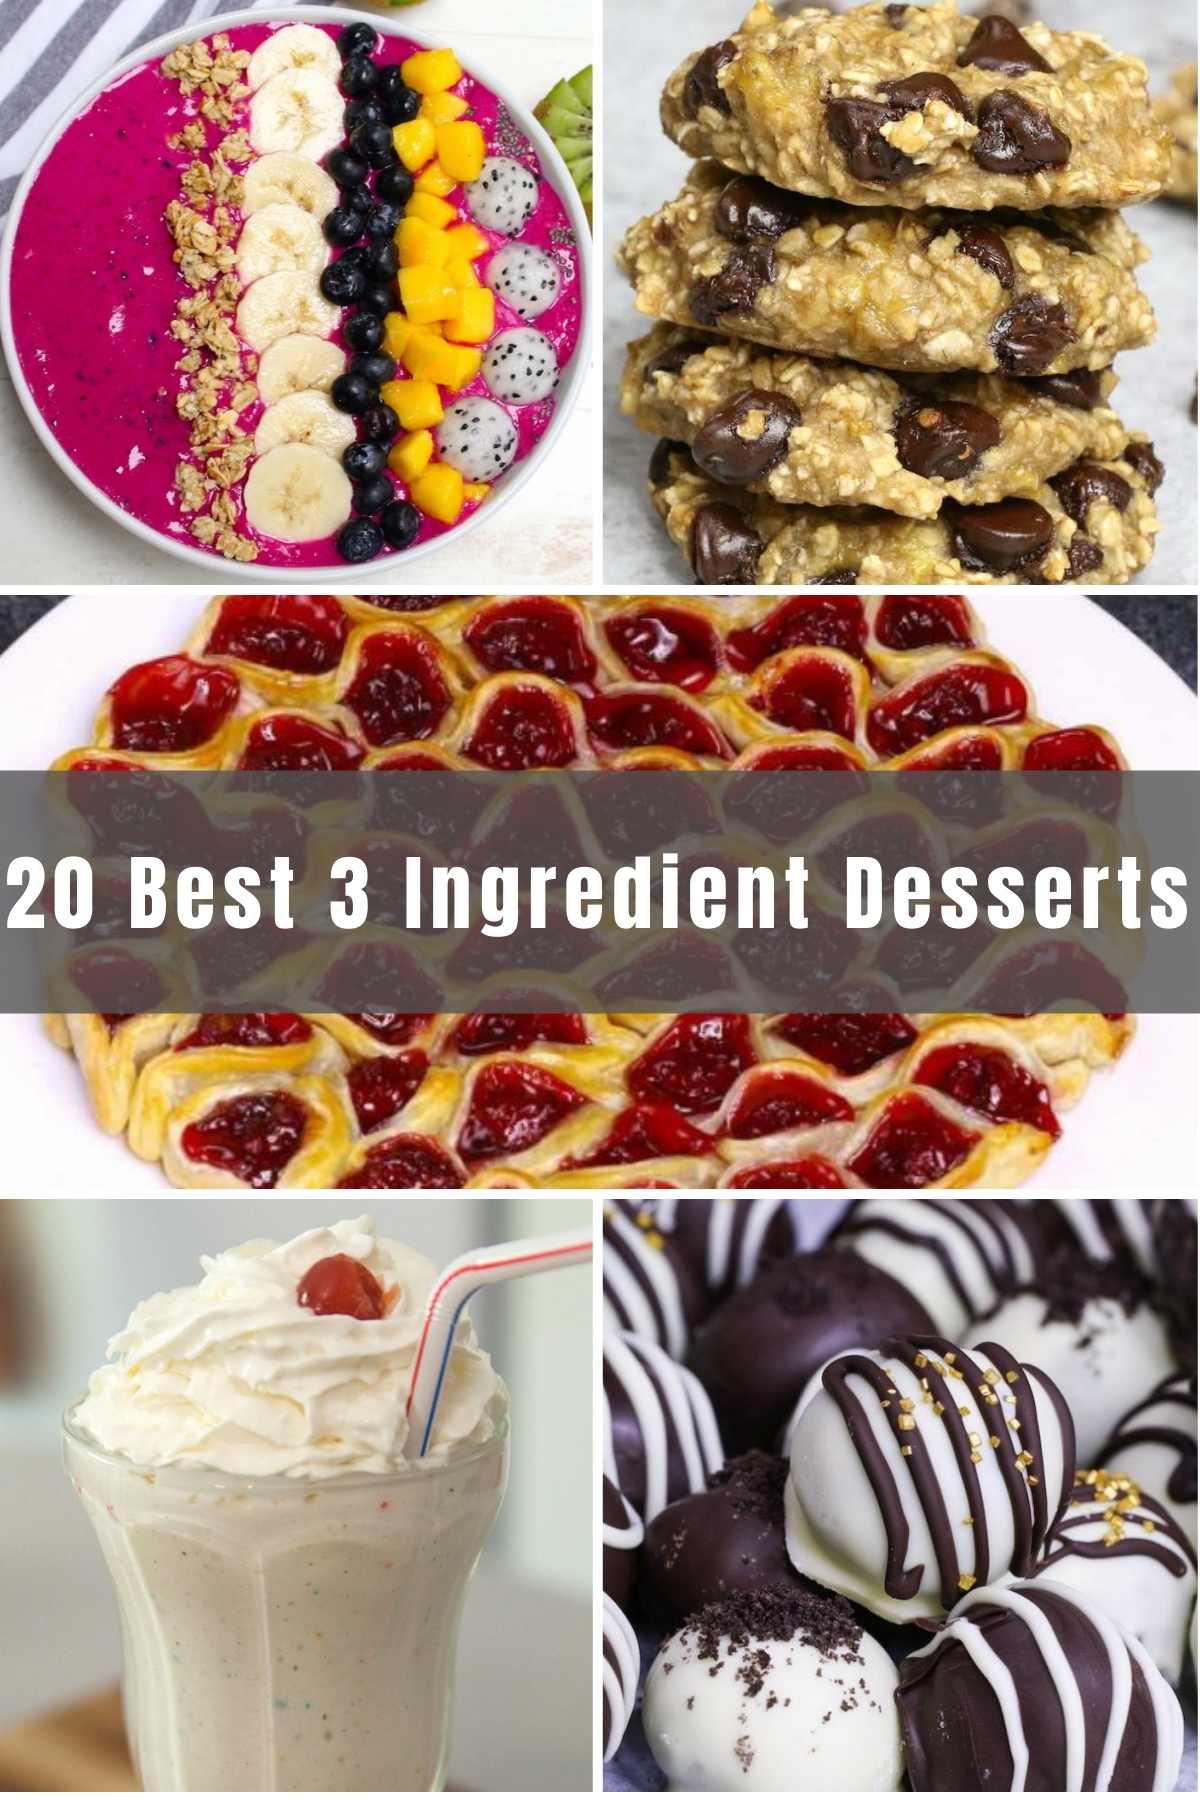 For those days when you don’t feel like spending a lot of time in the kitchen, we’ve selected 20 of the Best 3 Ingredient Desserts recipes for you to try out. And because these recipes have just 3 ingredients, you know they’ll be easy to make. Let’s get started!